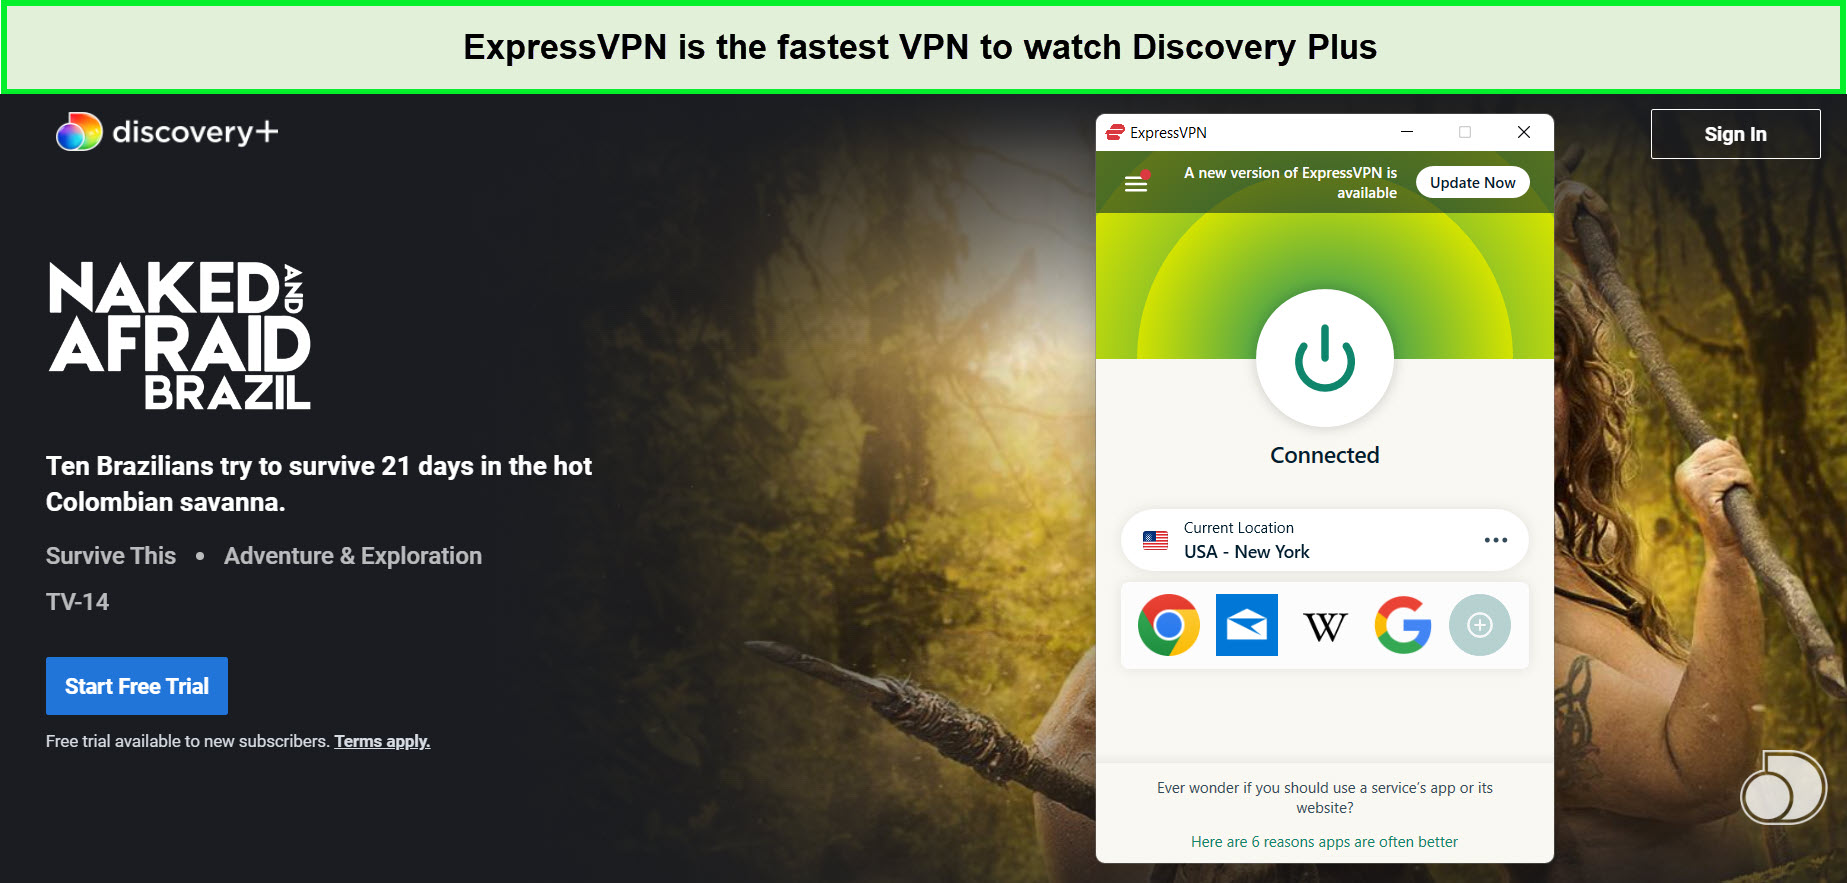 expressvpn-is-the-best-vpn-to-watch-naked-and-afraid-brazil-season-16-on-discovery-plus-in-ca